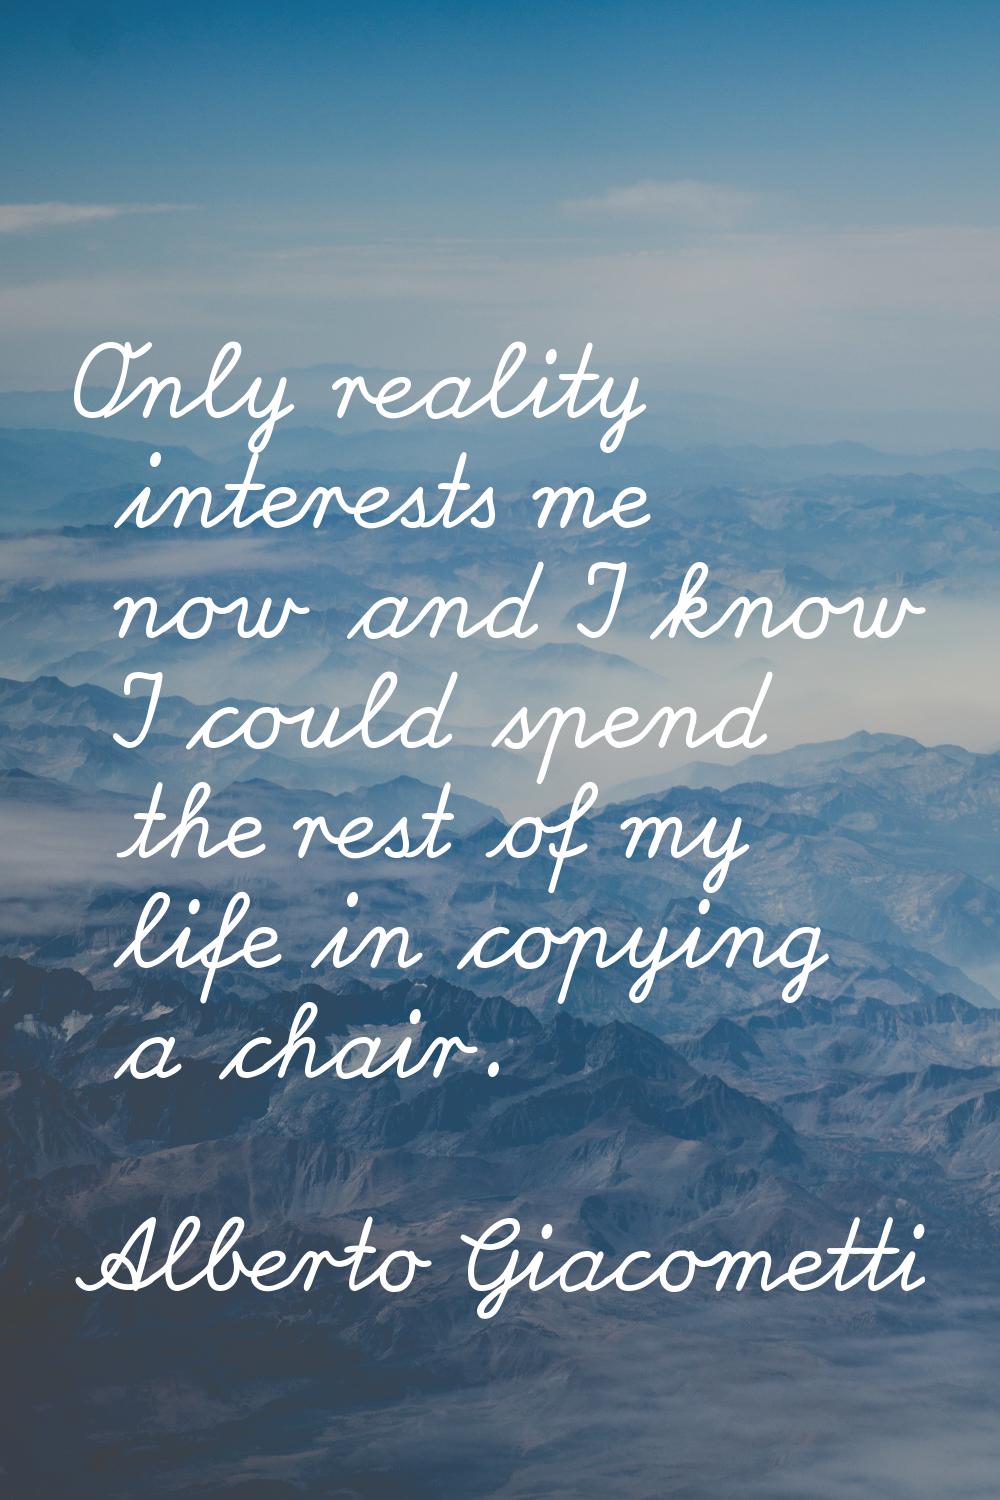 Only reality interests me now and I know I could spend the rest of my life in copying a chair.